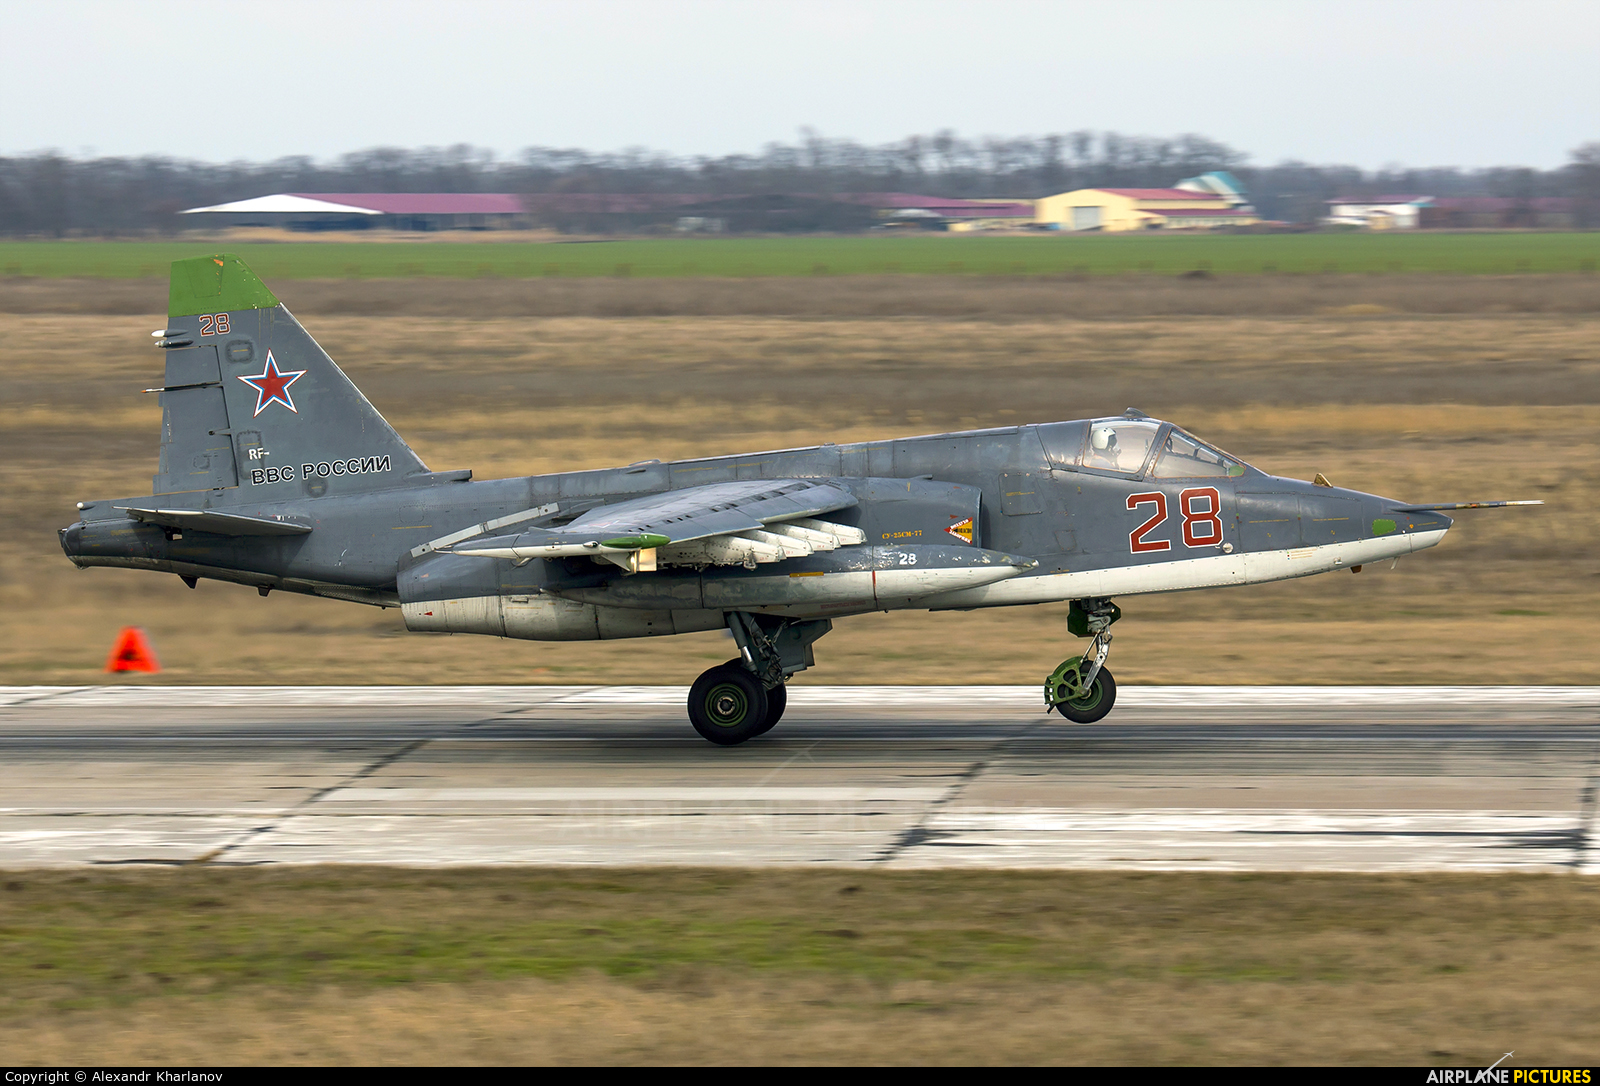 28 Russia Air Force Sukhoi Su 25sm At Undisclosed Location Photo Id 1029363 Airplane